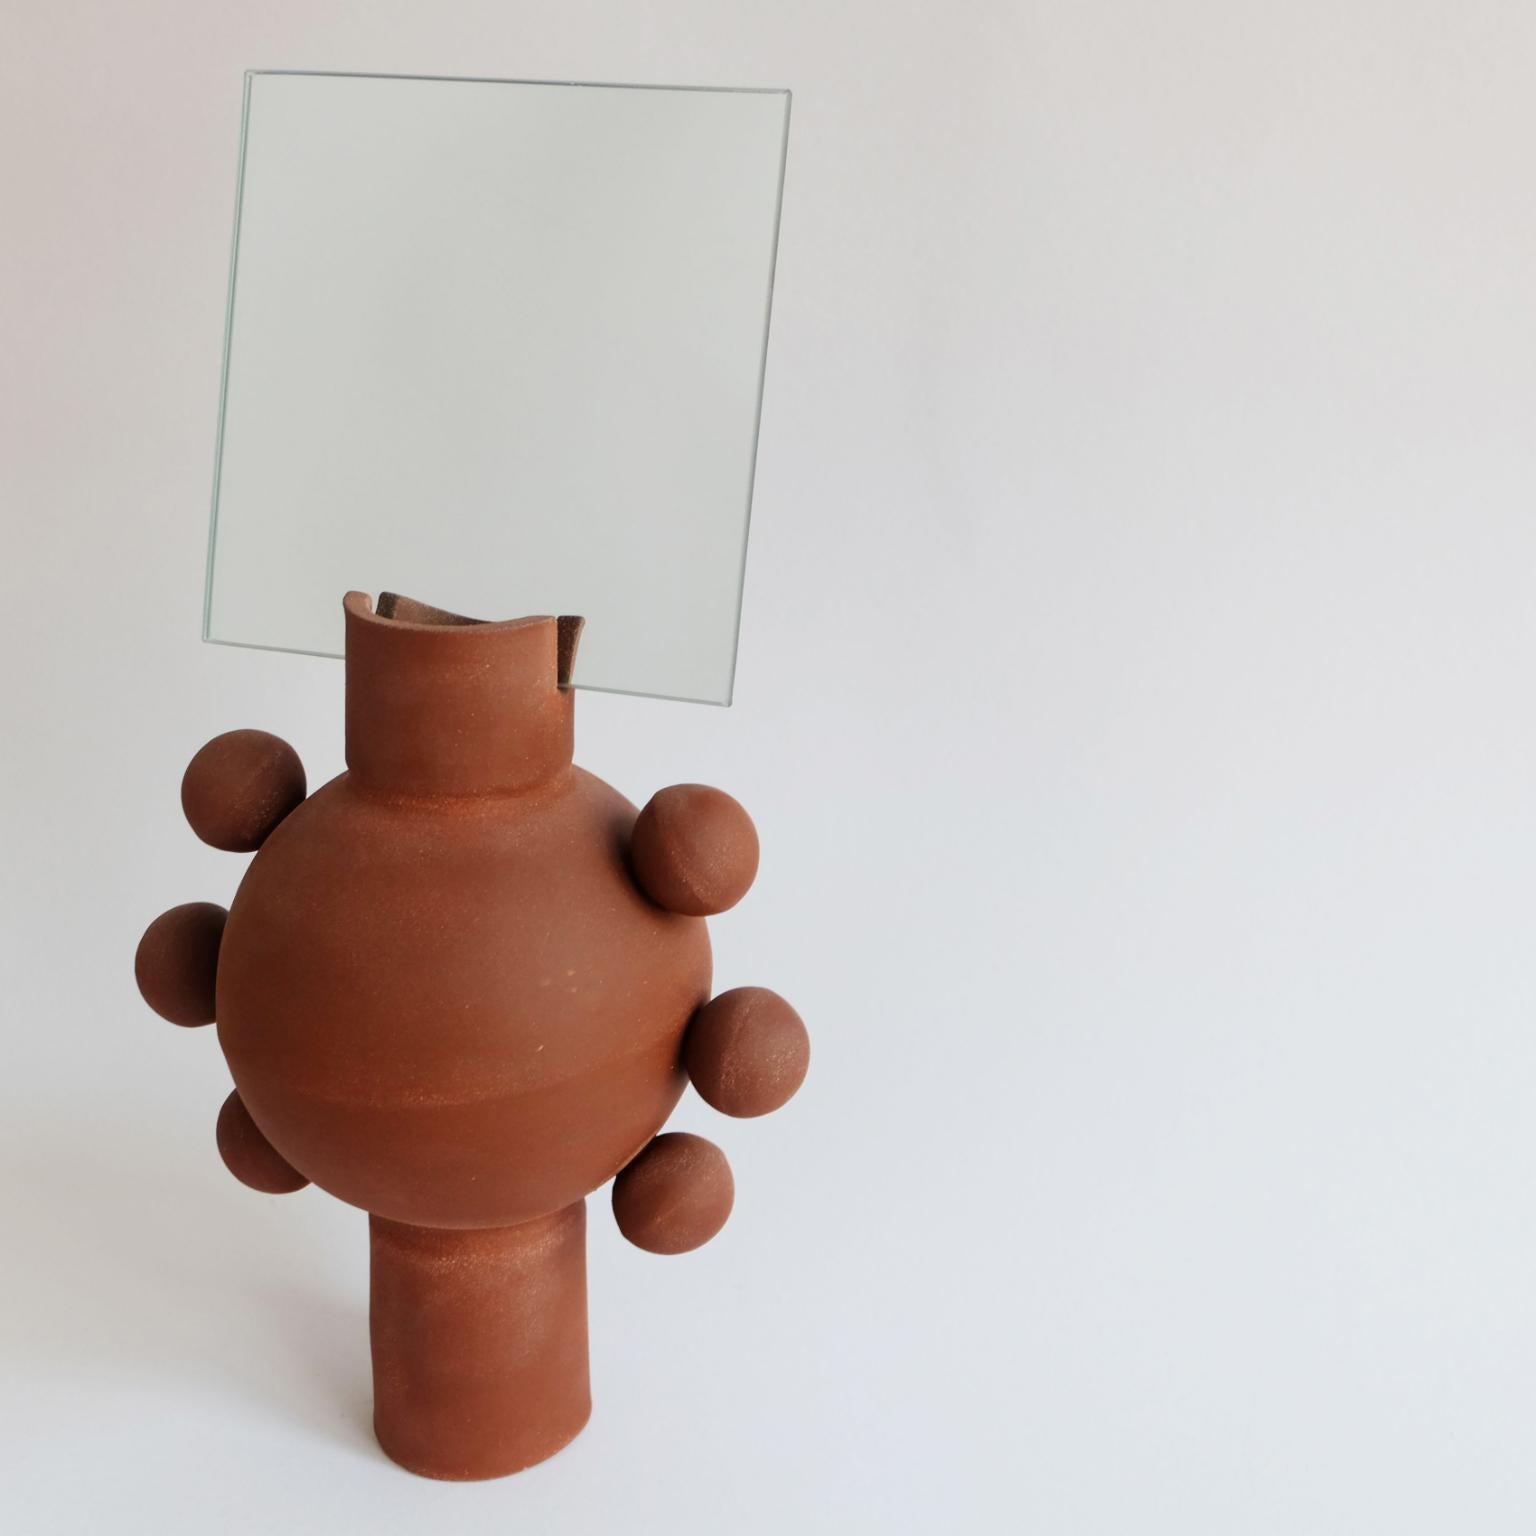 Unique UFO mirror by Ia Kutateladze
Dimensions: W 19 x H 38 cm
Materials: Clay
UFO 01 is a hand built ceramic mirror. Playful and bold functional decorative object, for various types of interiors.
IAAI / Ia Kutateladze is a Georgian